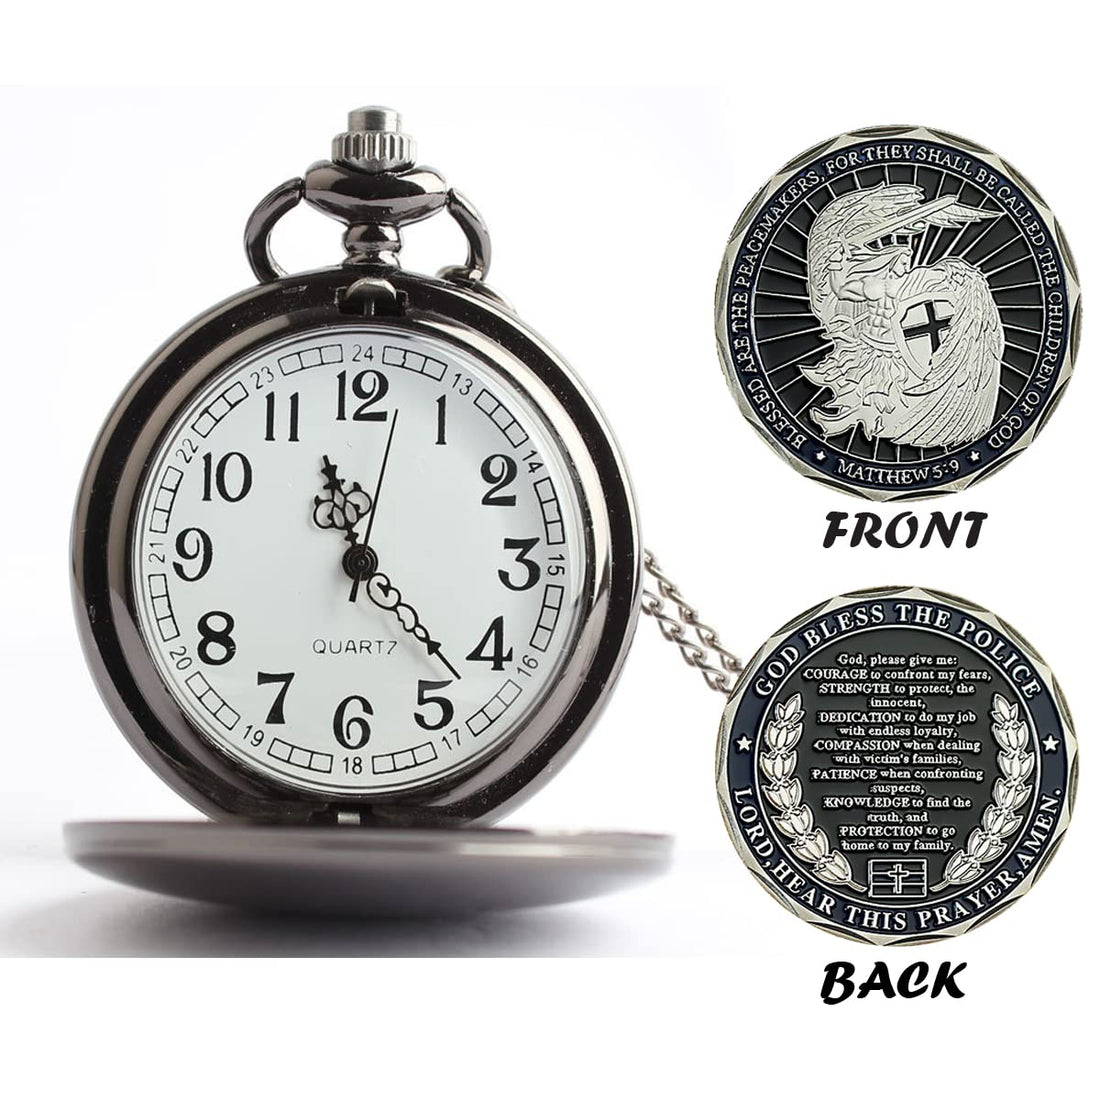 Jofanvin Gifts for Police,Pocket Watch for Policemen with Police ChanllengCoin,Best Blue line Gifts,Christmas Gifts for Police